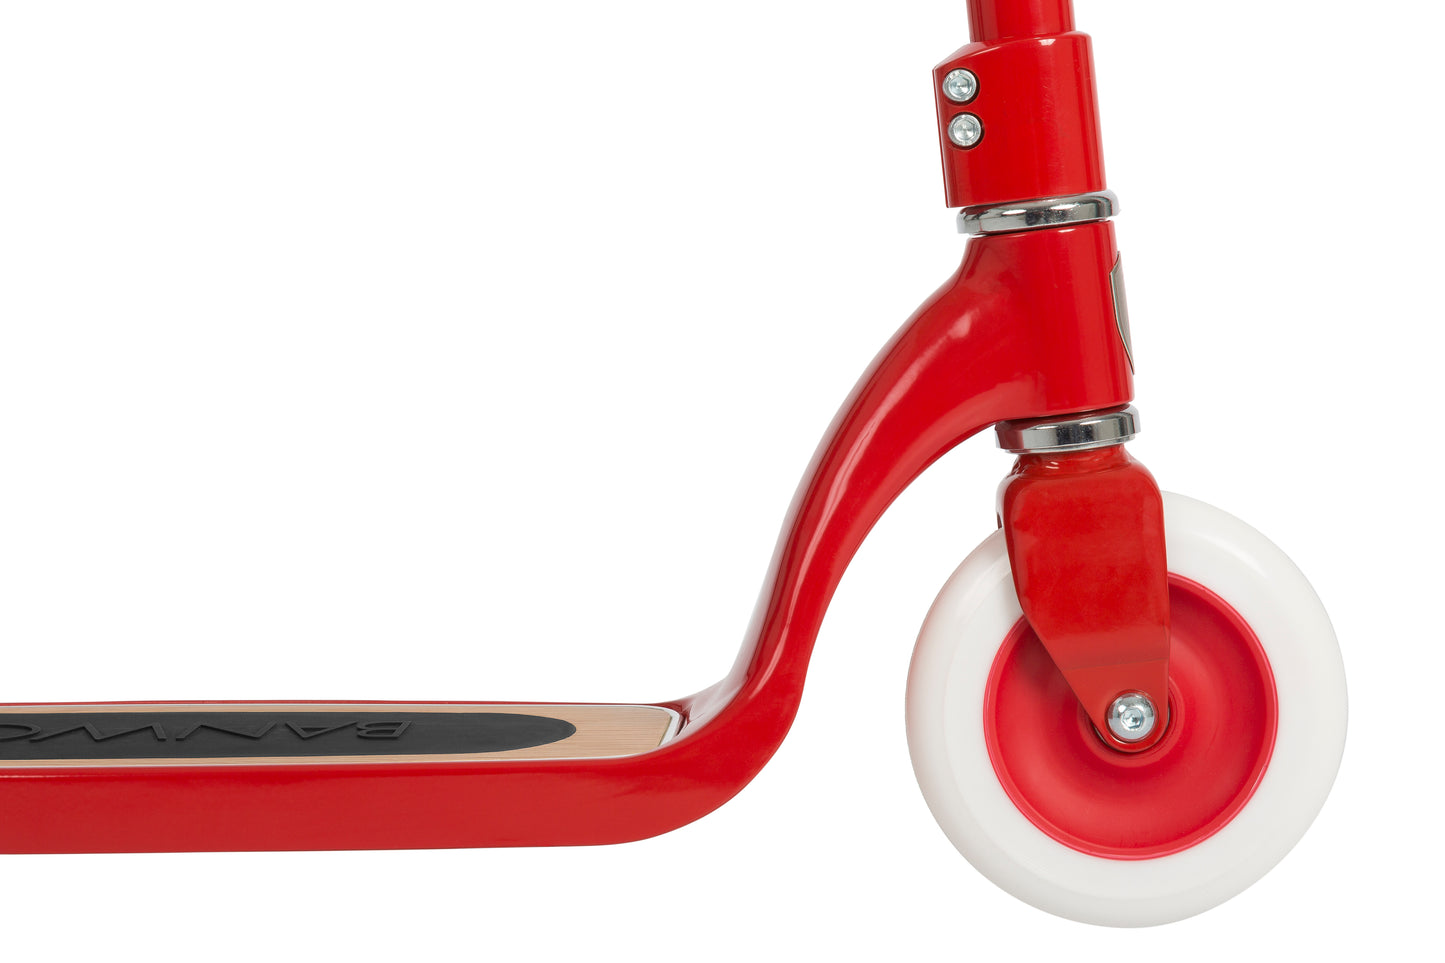 Maxi Scooter - Red - pre-order / back in stock End of February